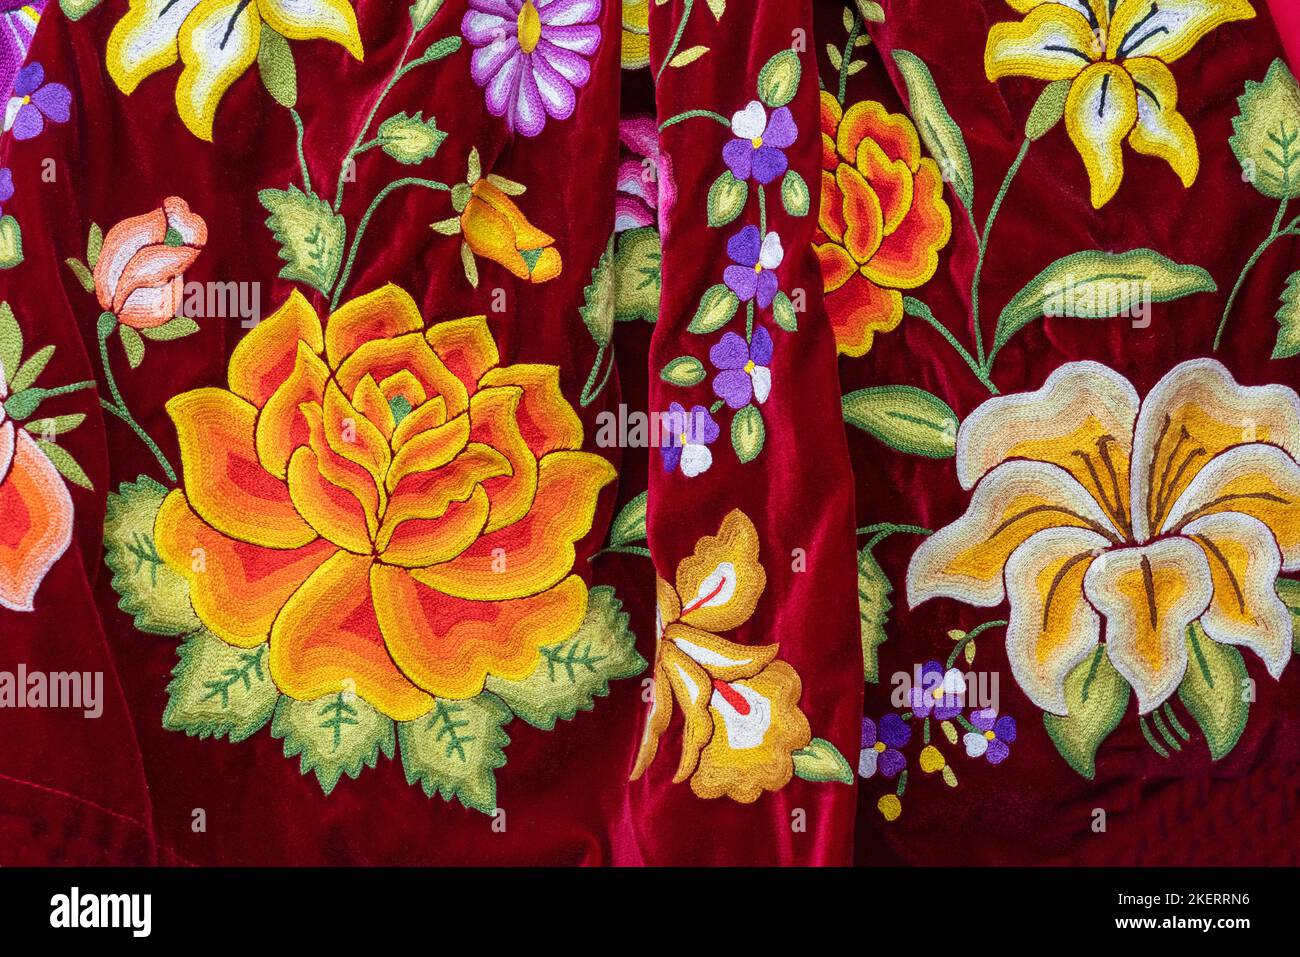 A colorful hand-embroidered blouse with floral pattern on velvet typical of the Istmo Region of the Pacific Coast, Oaxaca, Mexico. Stock Photo